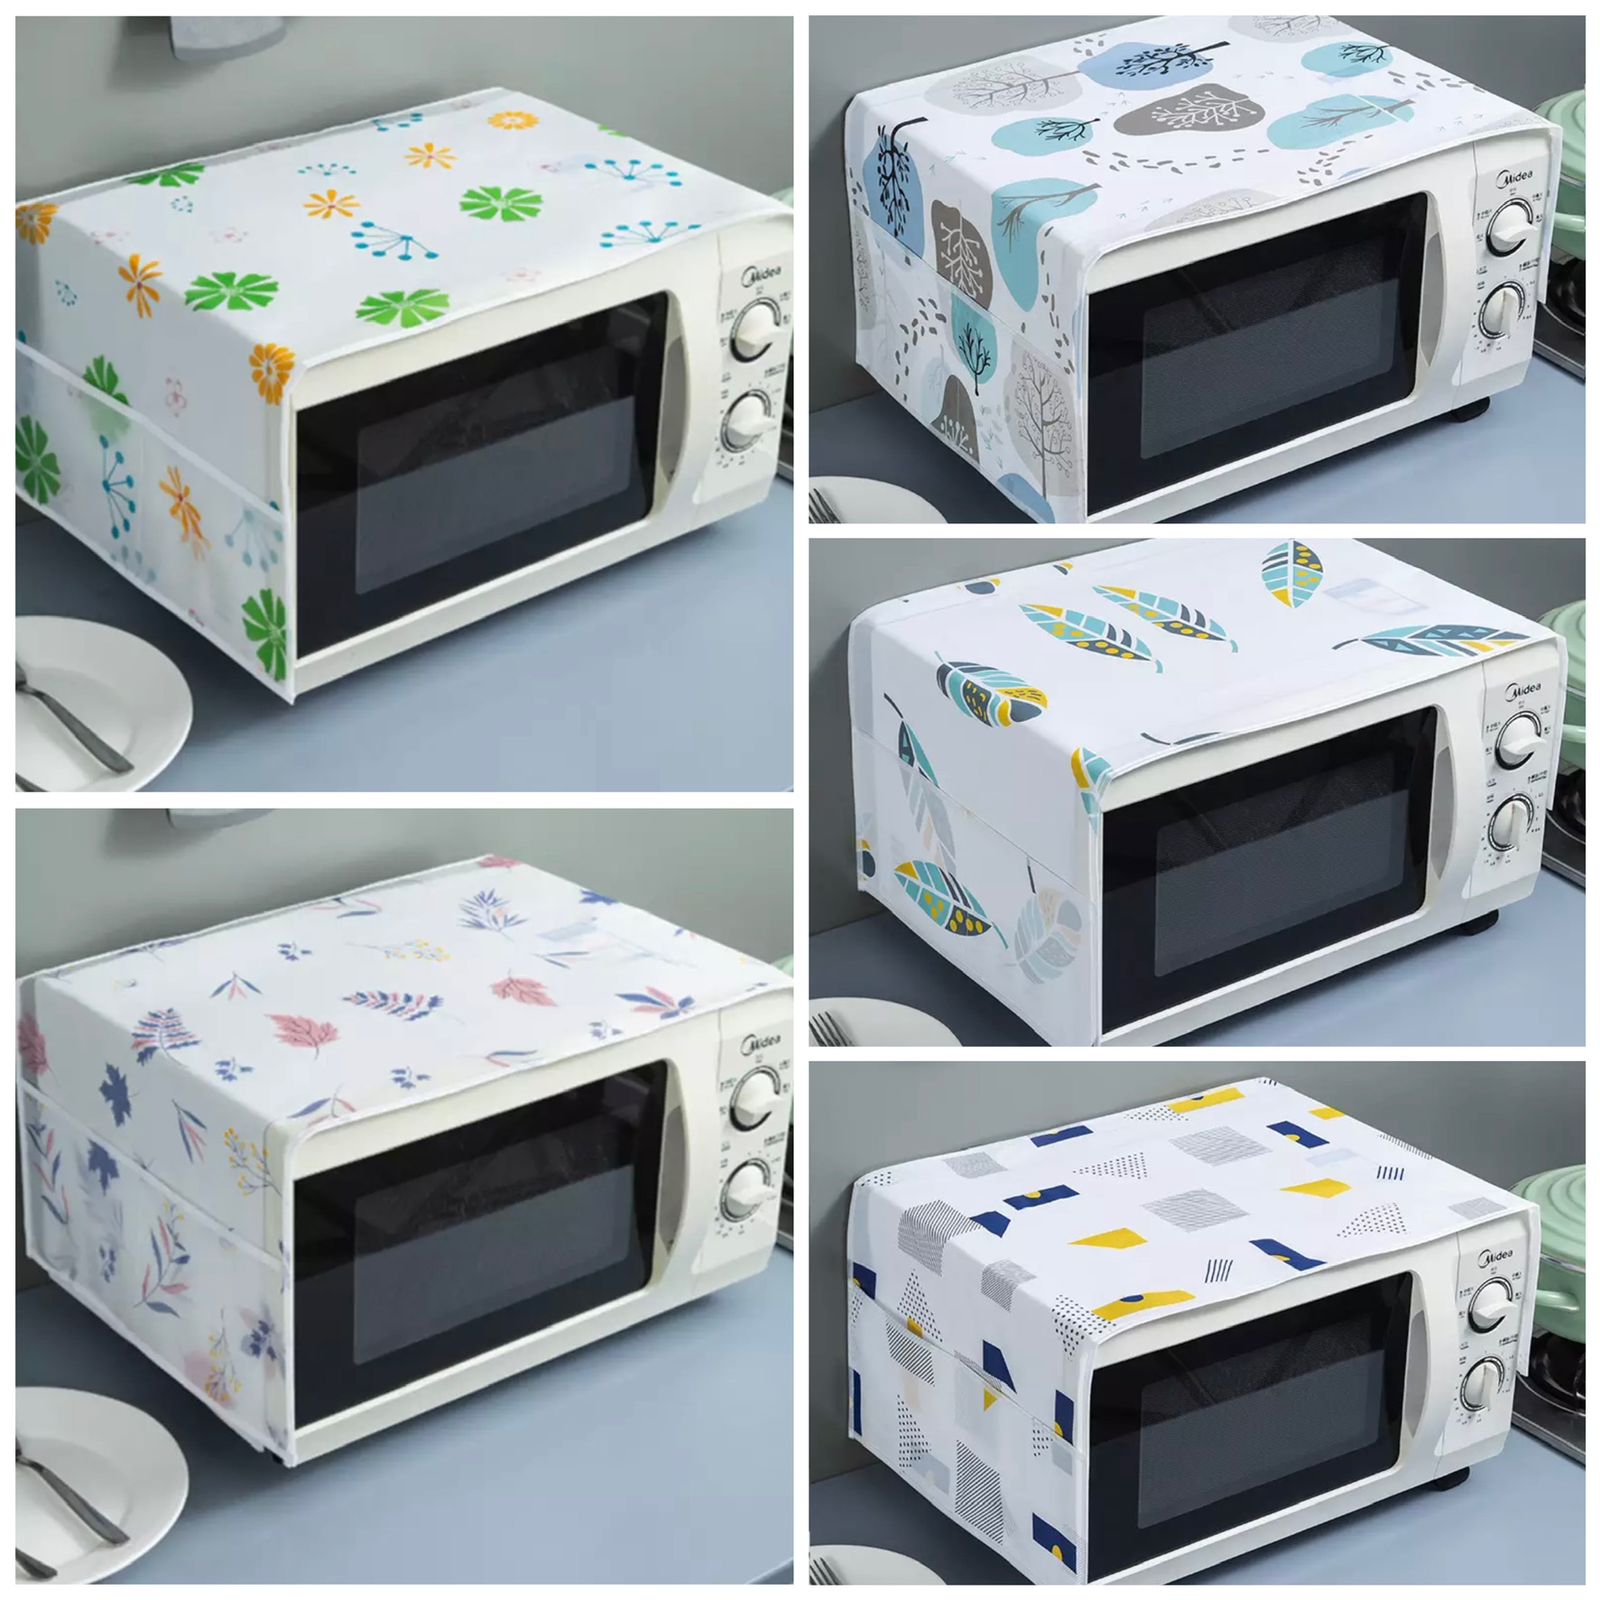 Promotion Clearance! Microwave Oven Dustproof Cover,Microwave